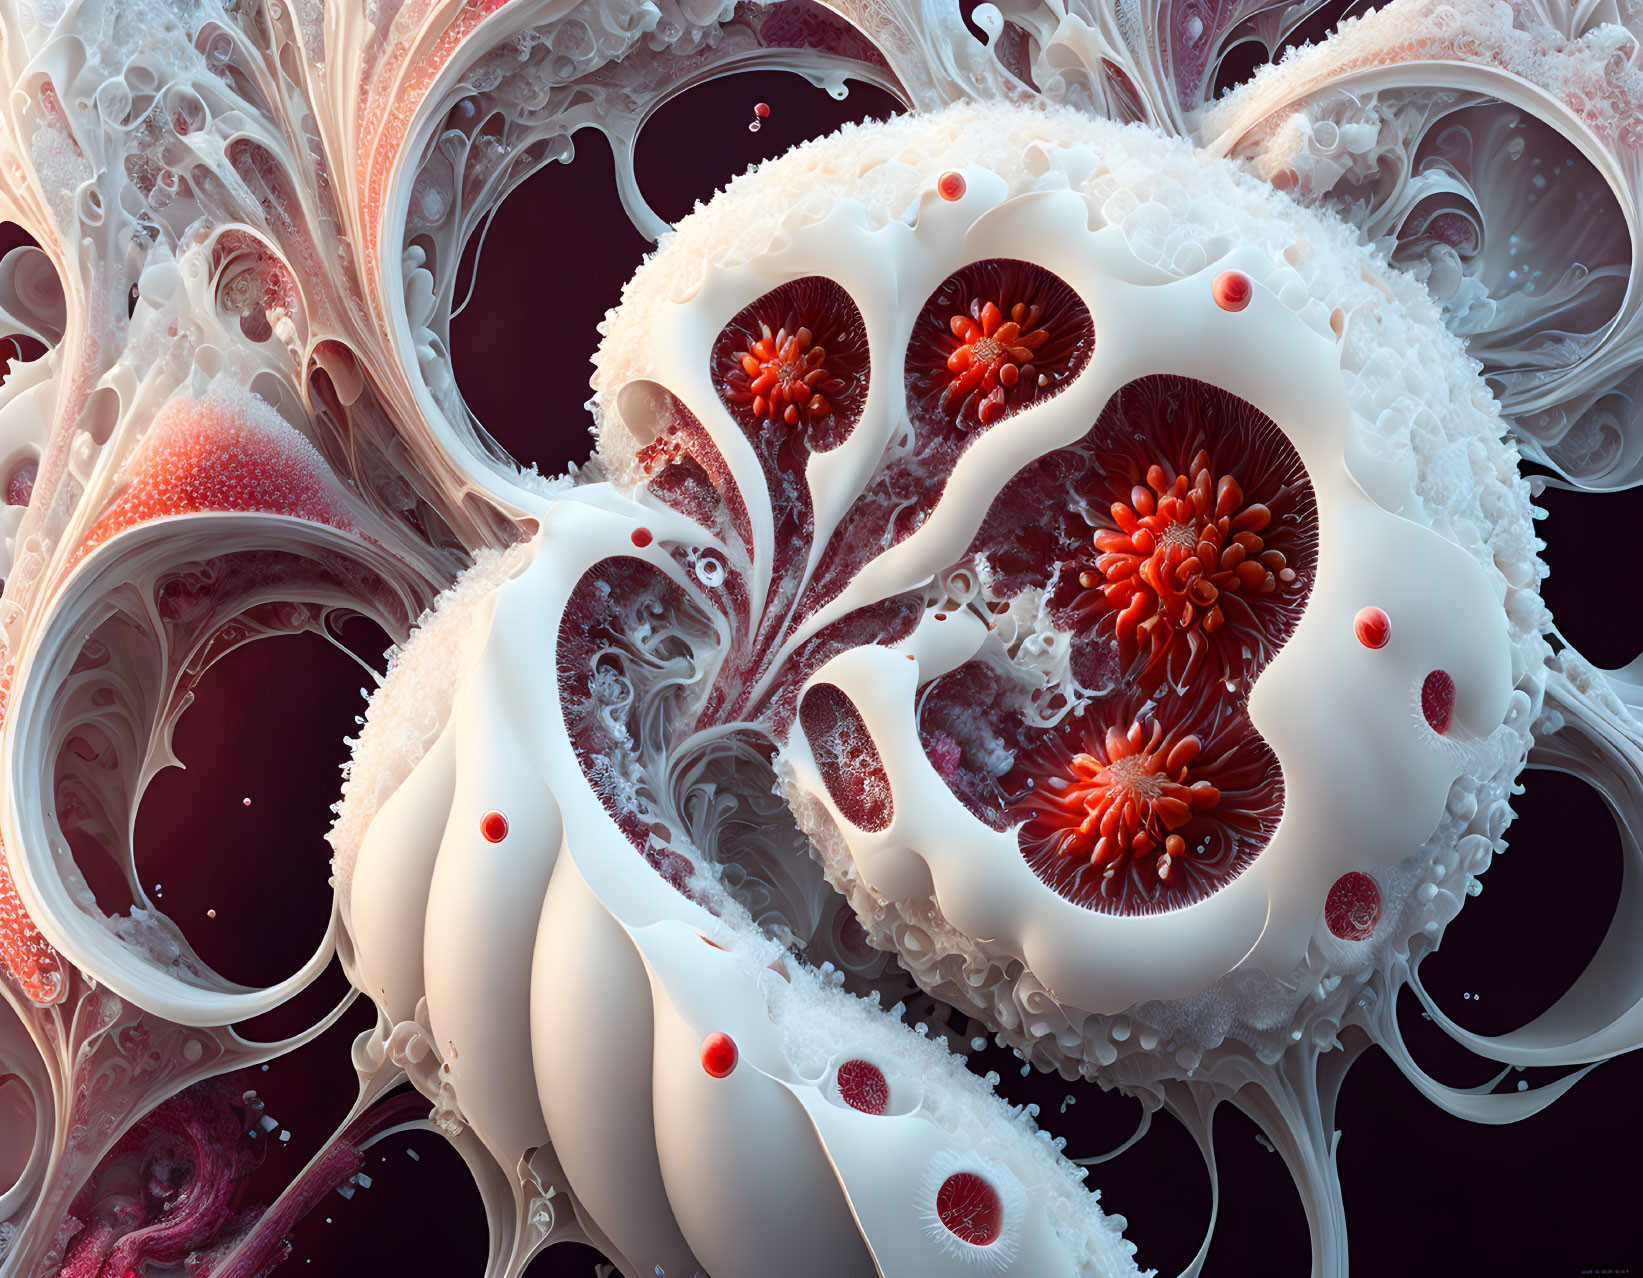 Detailed Fractal Image with Intricate Pink, White, and Red Biological Patterns